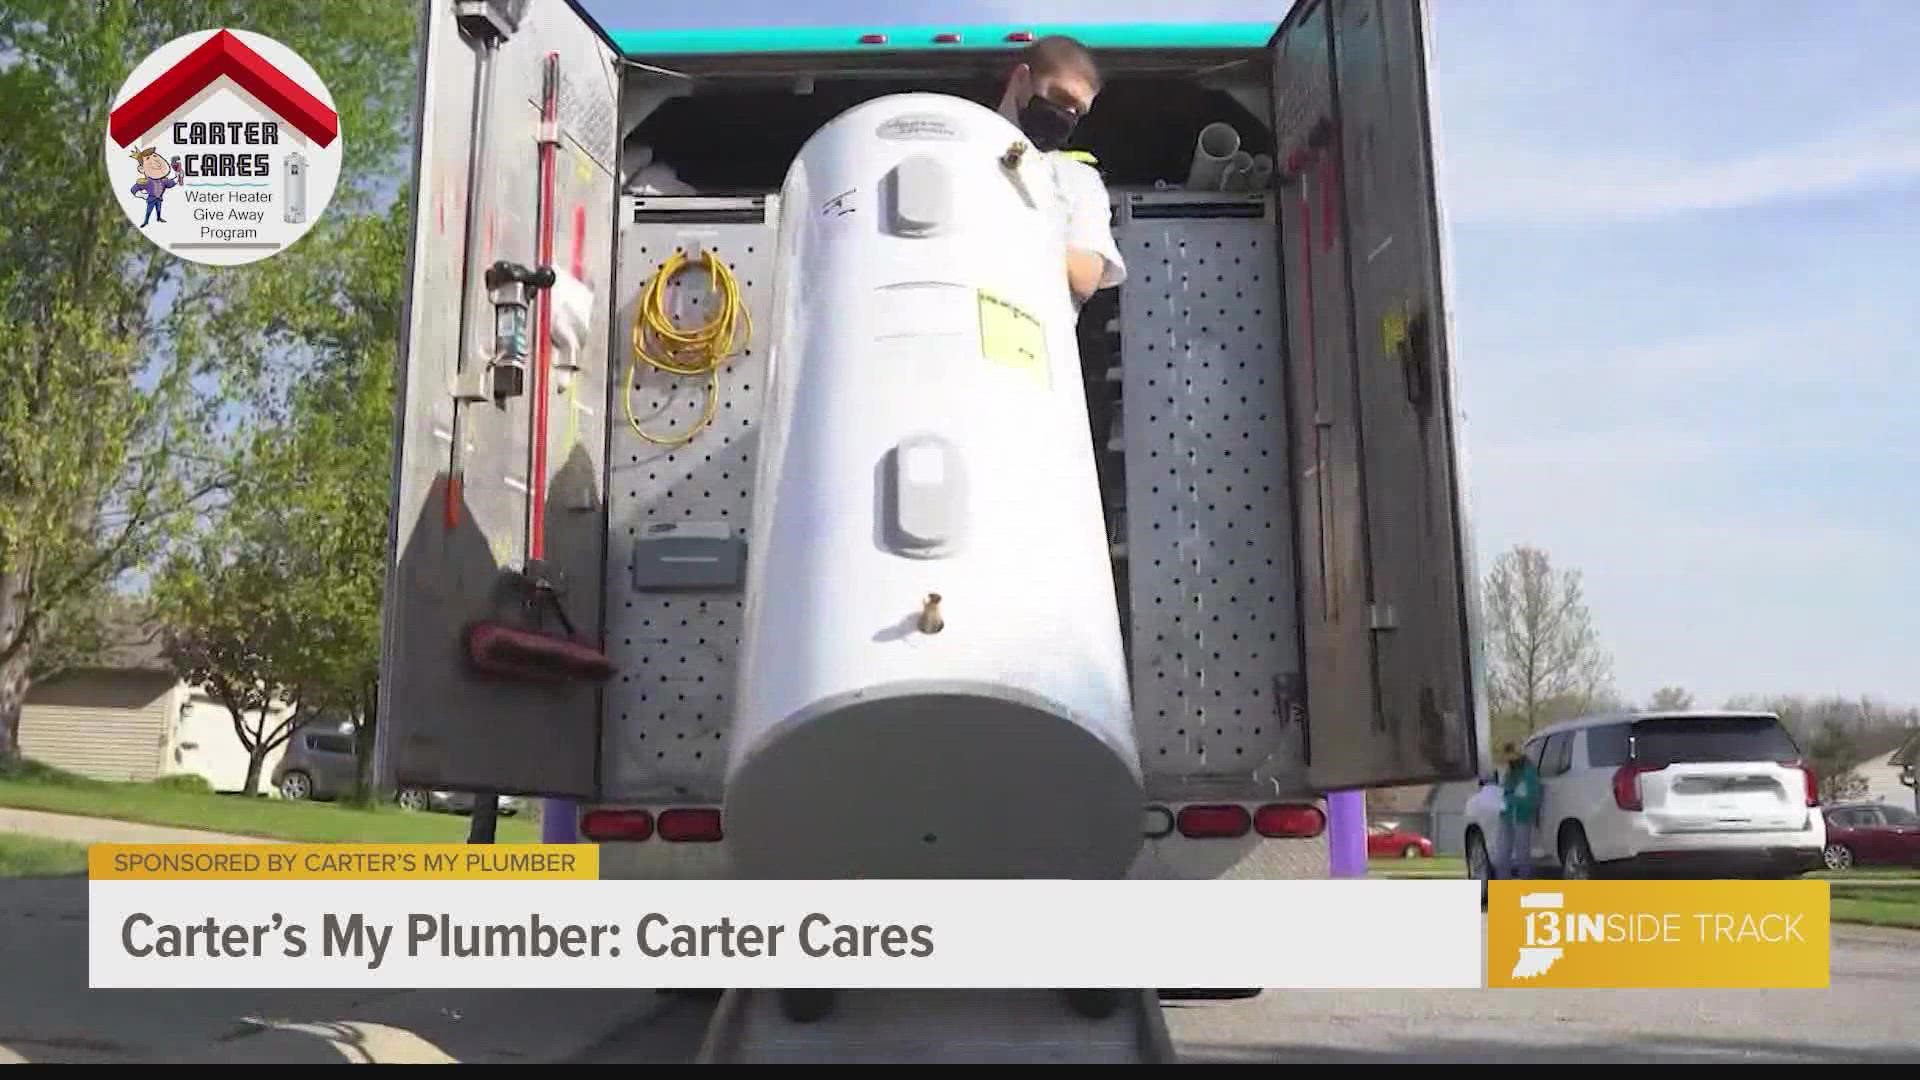 The Carter Cares program donates hot water heaters to families in need.